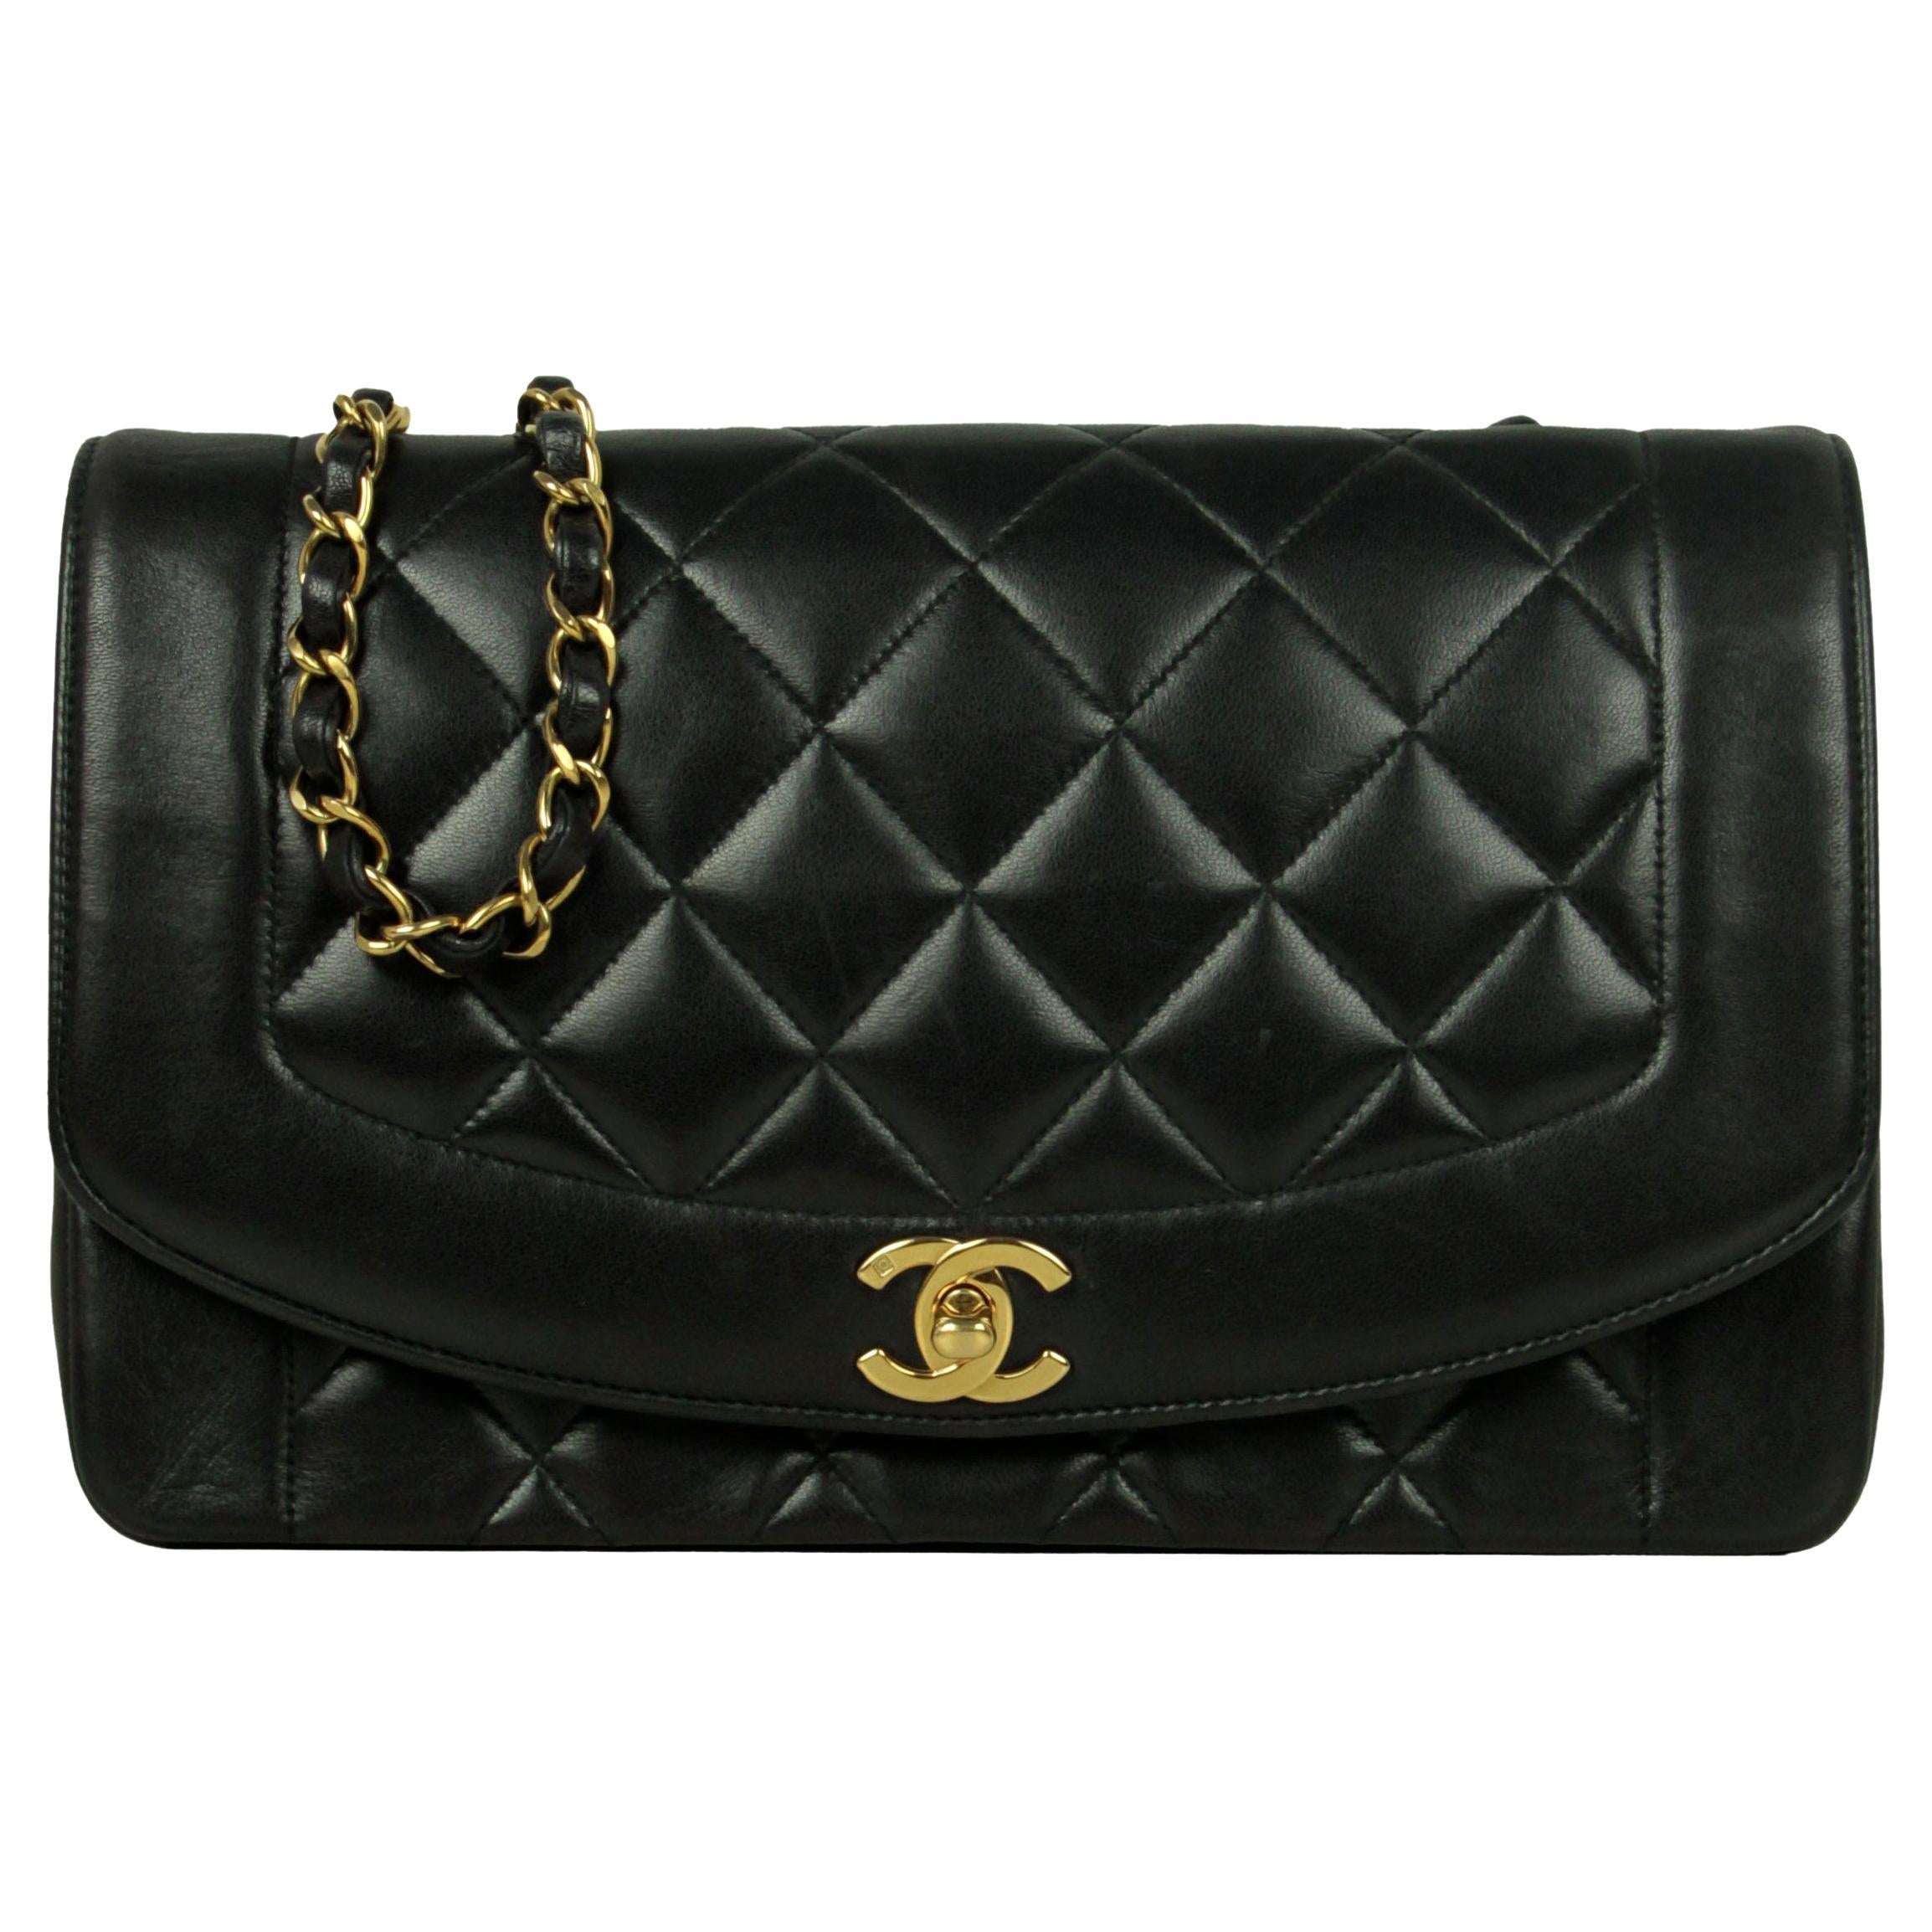 Chanel Vintage Black Lambskin Leather Quilted Medium Diana Flap Bag